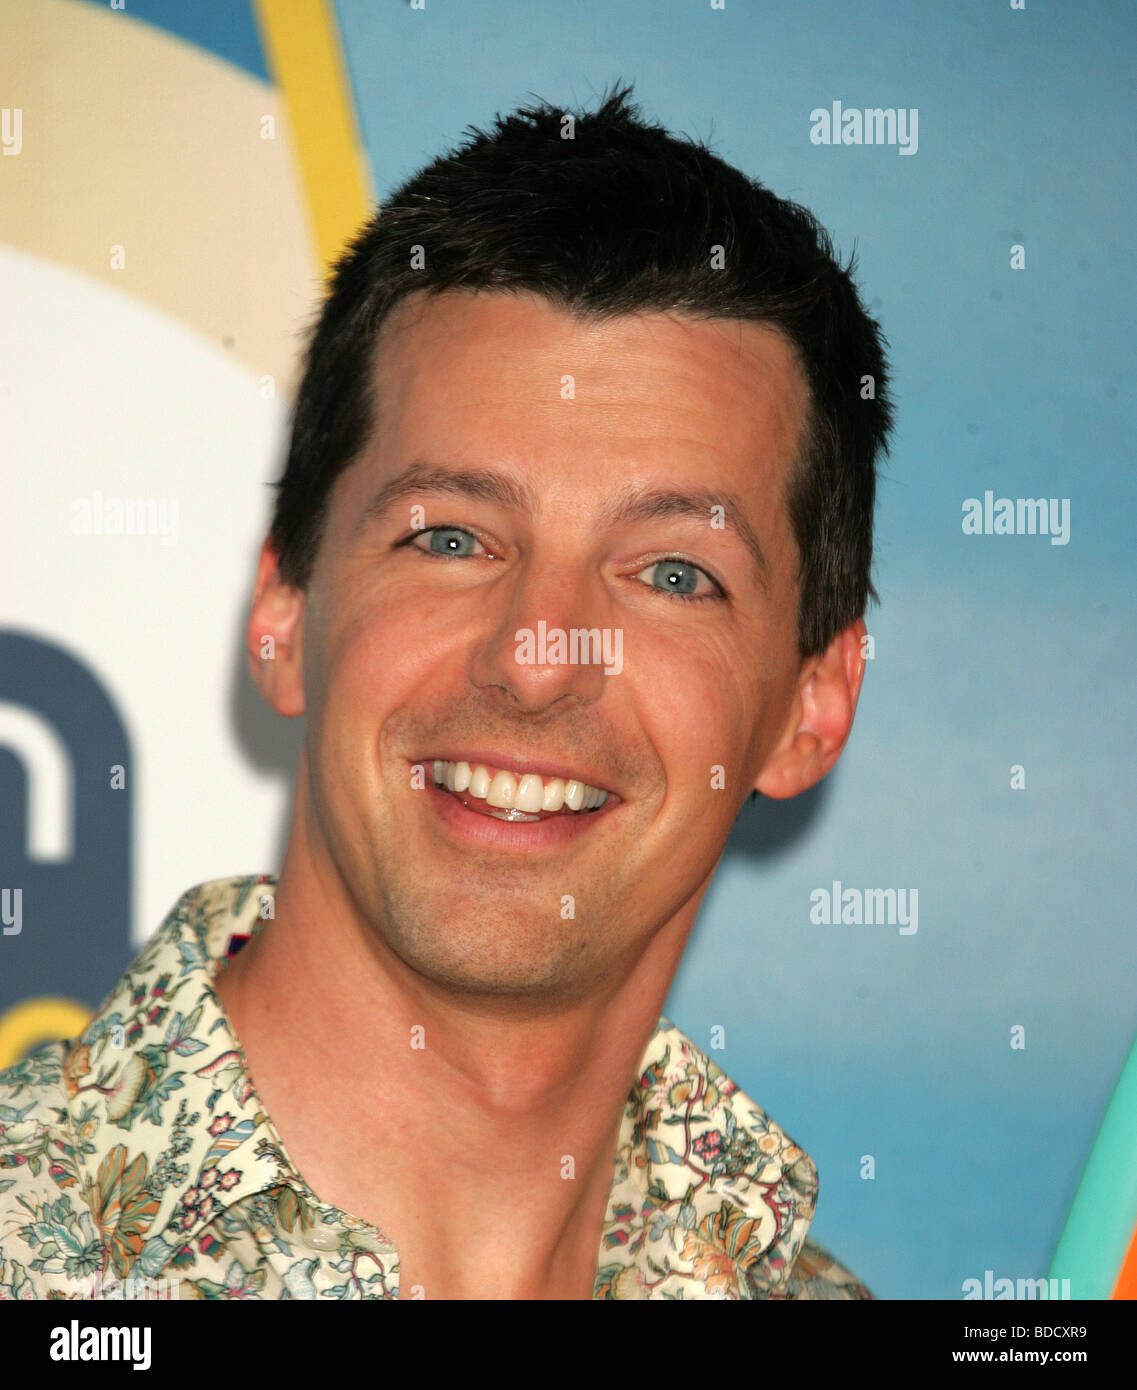 SEAN HAYES - American actor and comedian Stock Photo